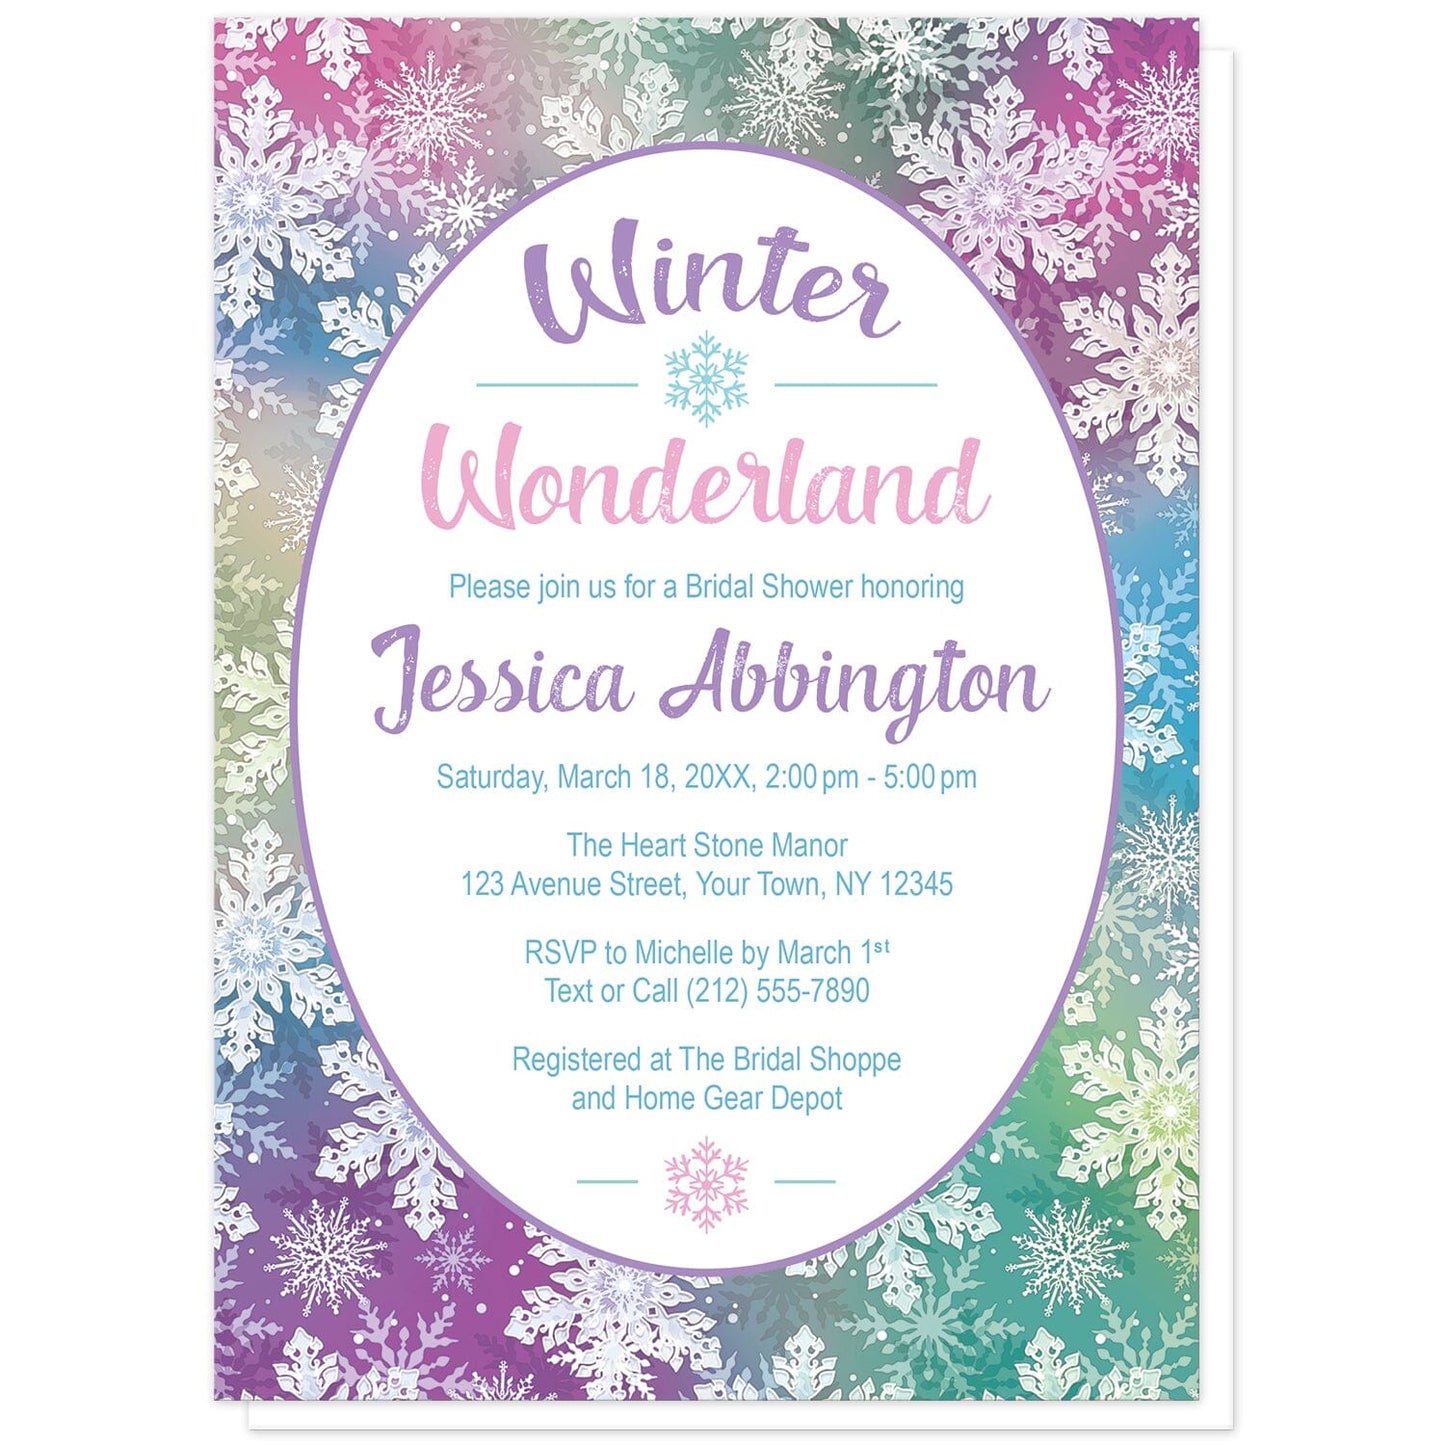 Rainbow Snowflake Winter Wonderland Bridal Shower Invitations at Artistically Invited. Beautifully ornate rainbow snowflake Winter Wonderland bridal shower invitations designed with your personalized bridal shower details custom printed in colorful text in a white oval frame design over a beautiful and ornate rainbow snowflake pattern with white snowflakes over a multicolored background.